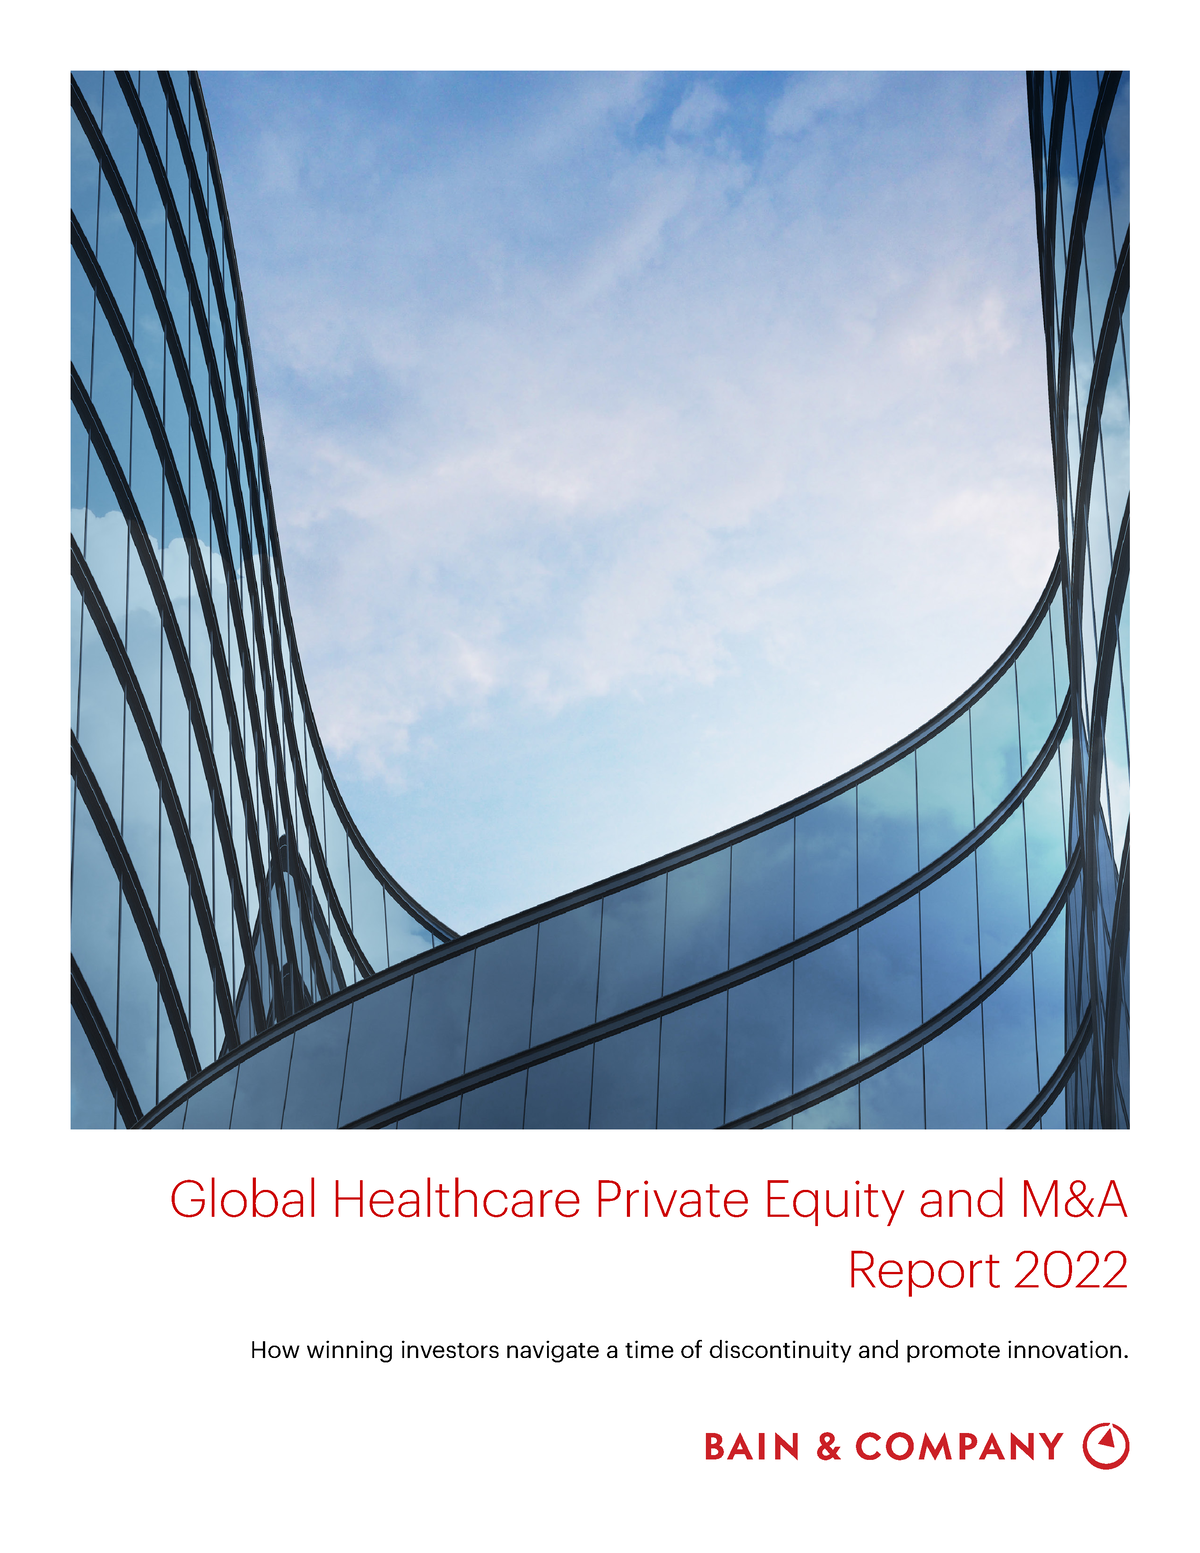 Bain report global healthcare private equity and ma 2022 Global